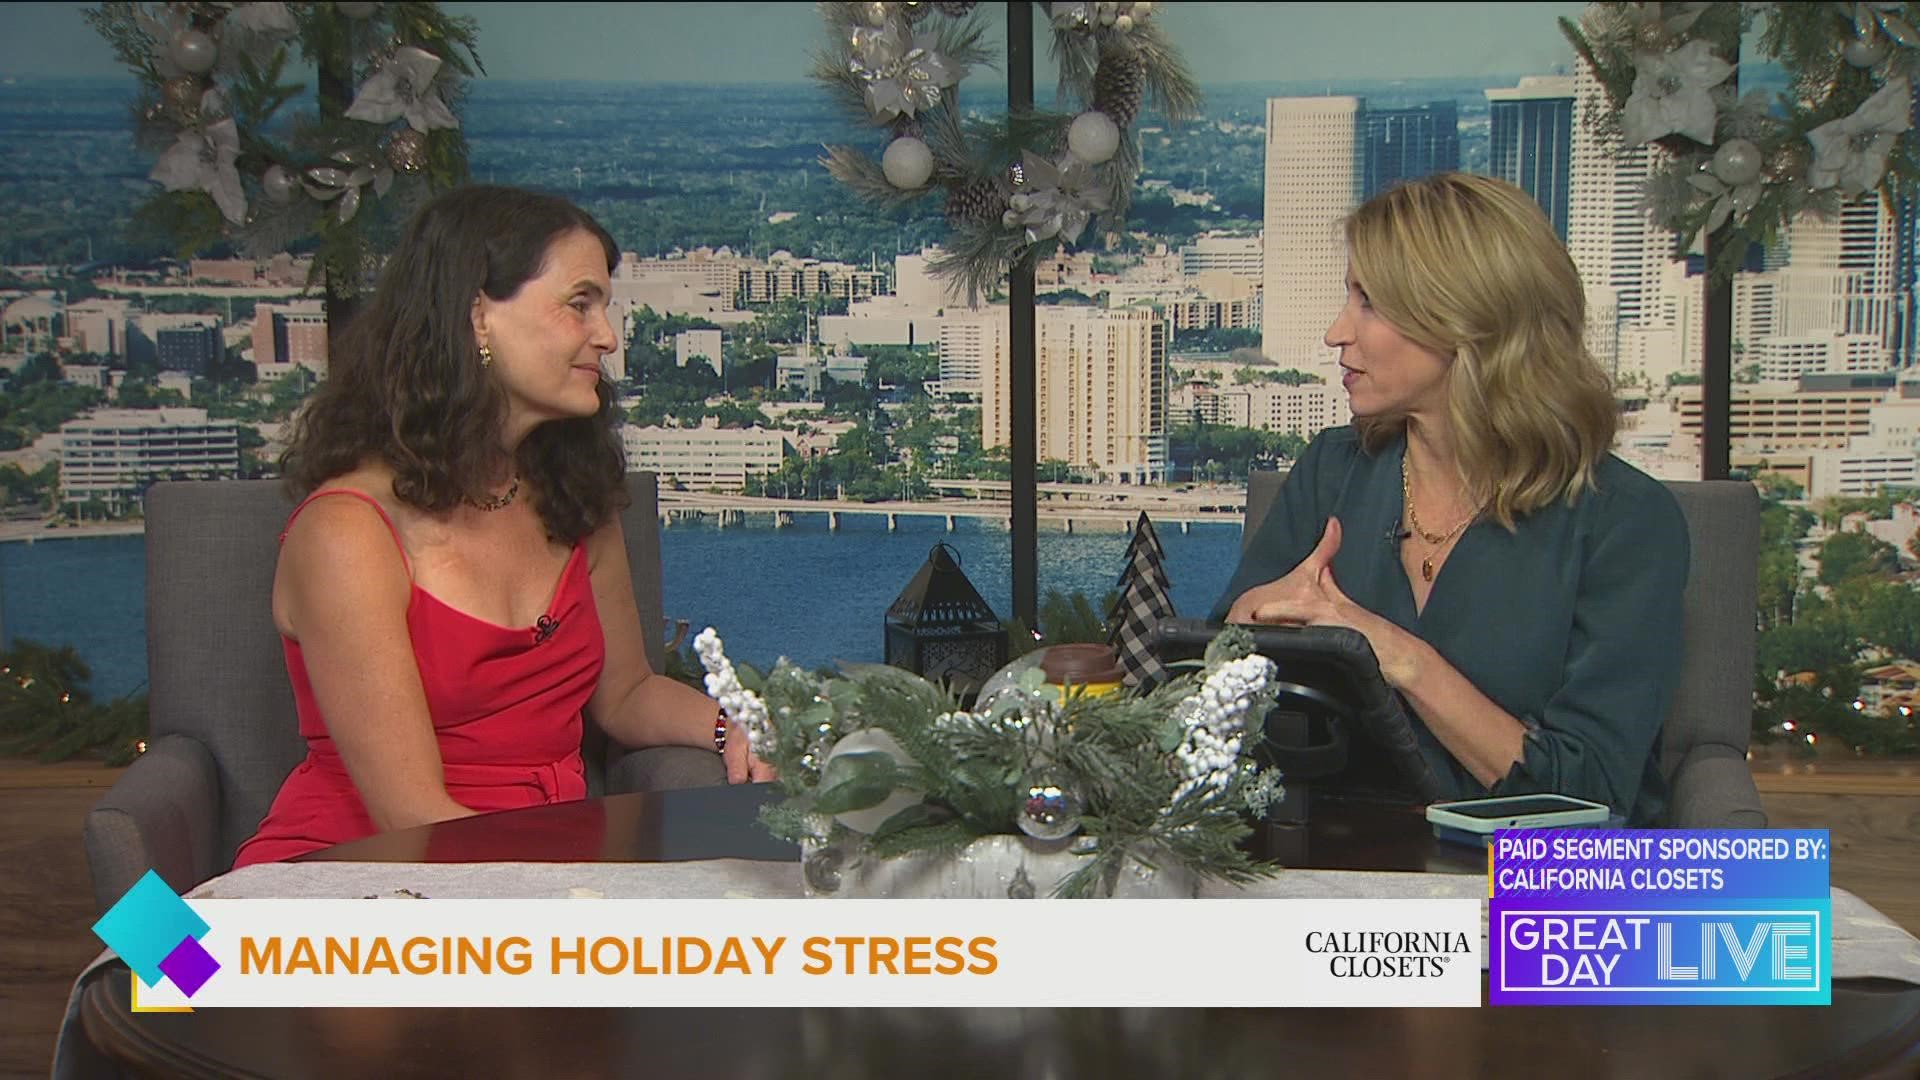 In today's Host Help sponsored by California Closets, Dr. Lisa Koche with Spectra Wellness shares practical ways to relieve stress during the holidays.